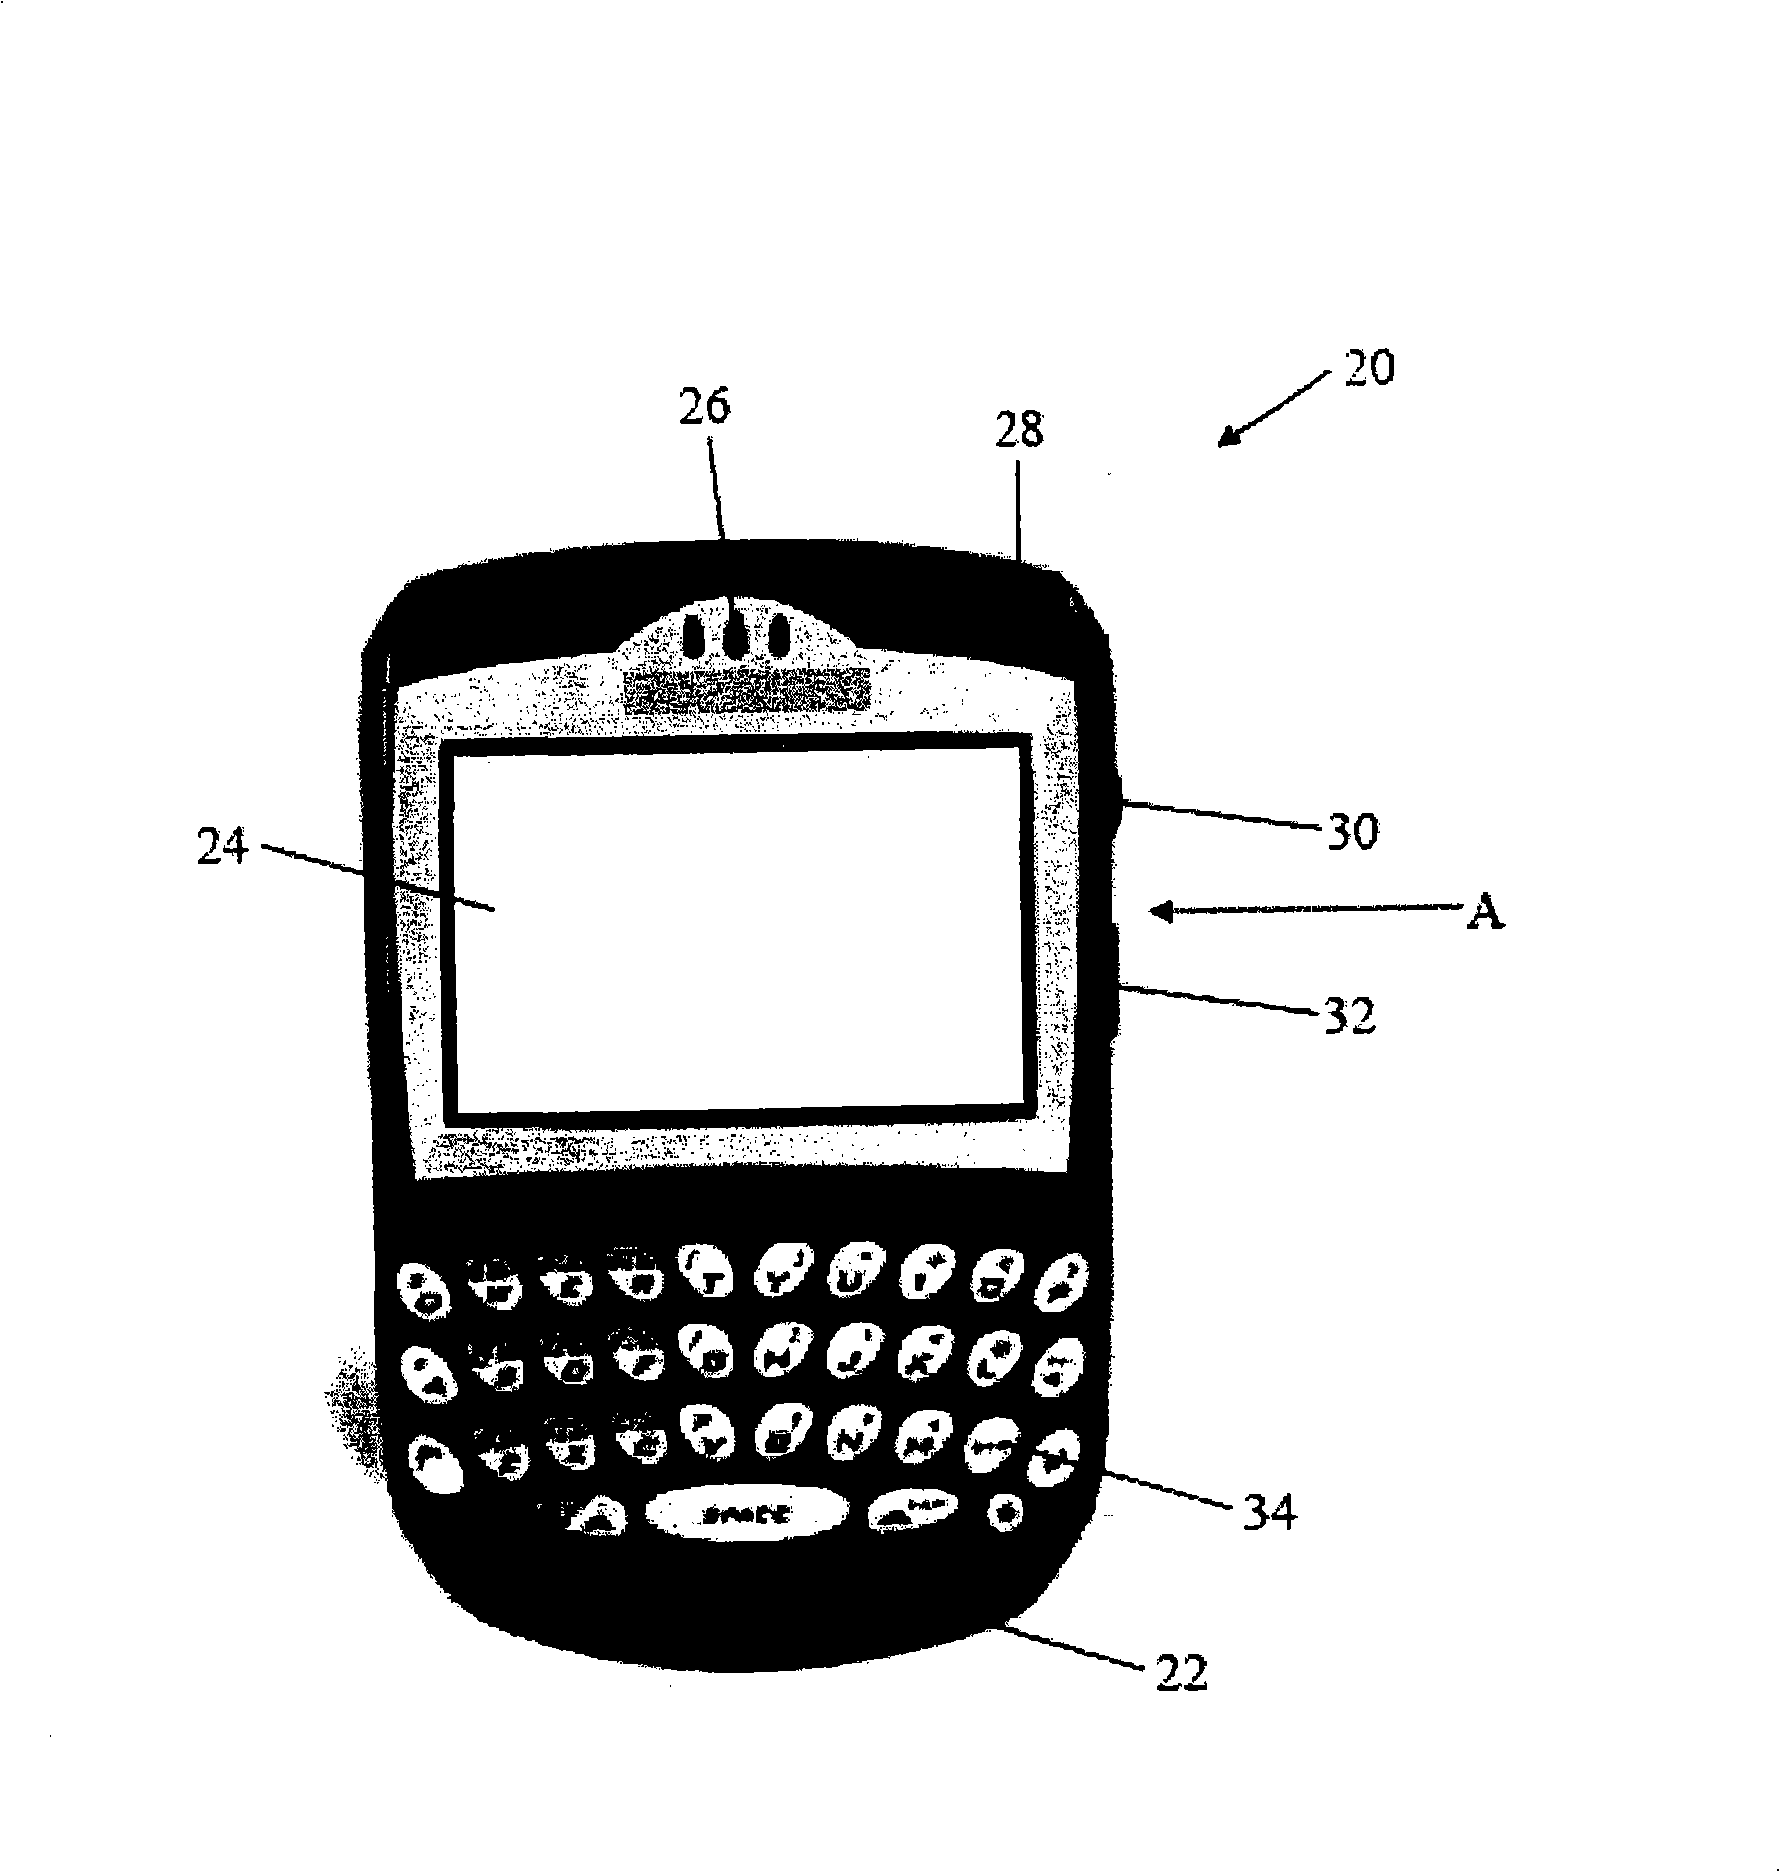 Automatic screen and keypad brightness adjustment on a mobile handheld electronic device